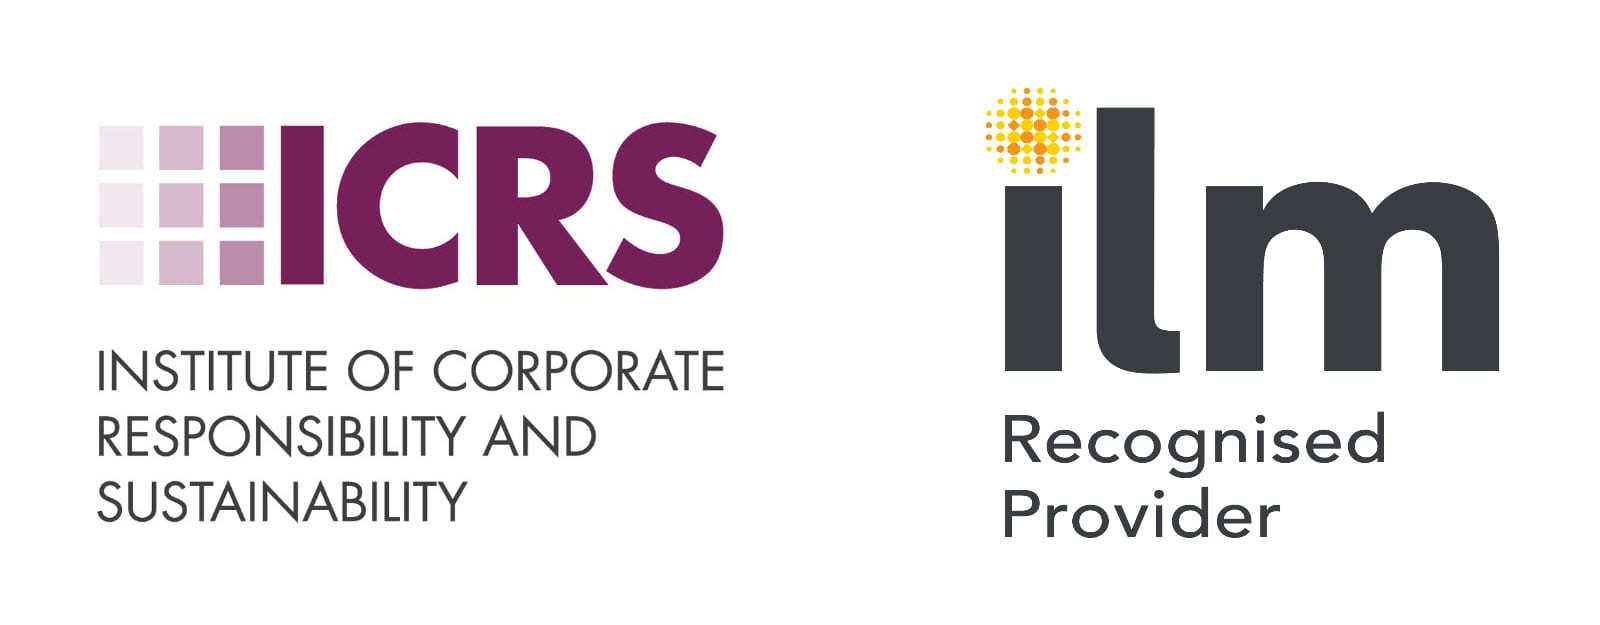 Responsible Business Management Training at Business in the Community is accredited by ICRS and the ILM. 